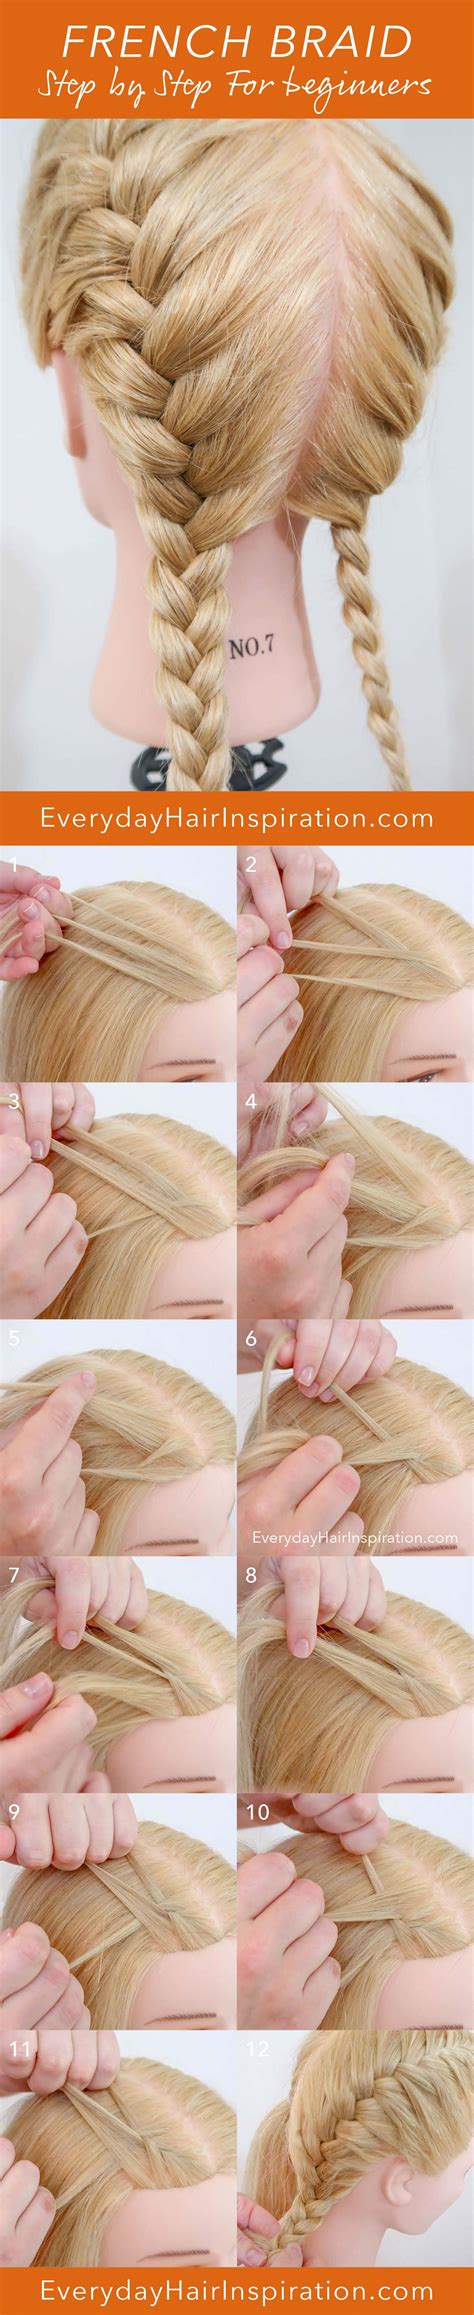 How To French Braid For Beginners Easy French Braid French Braid